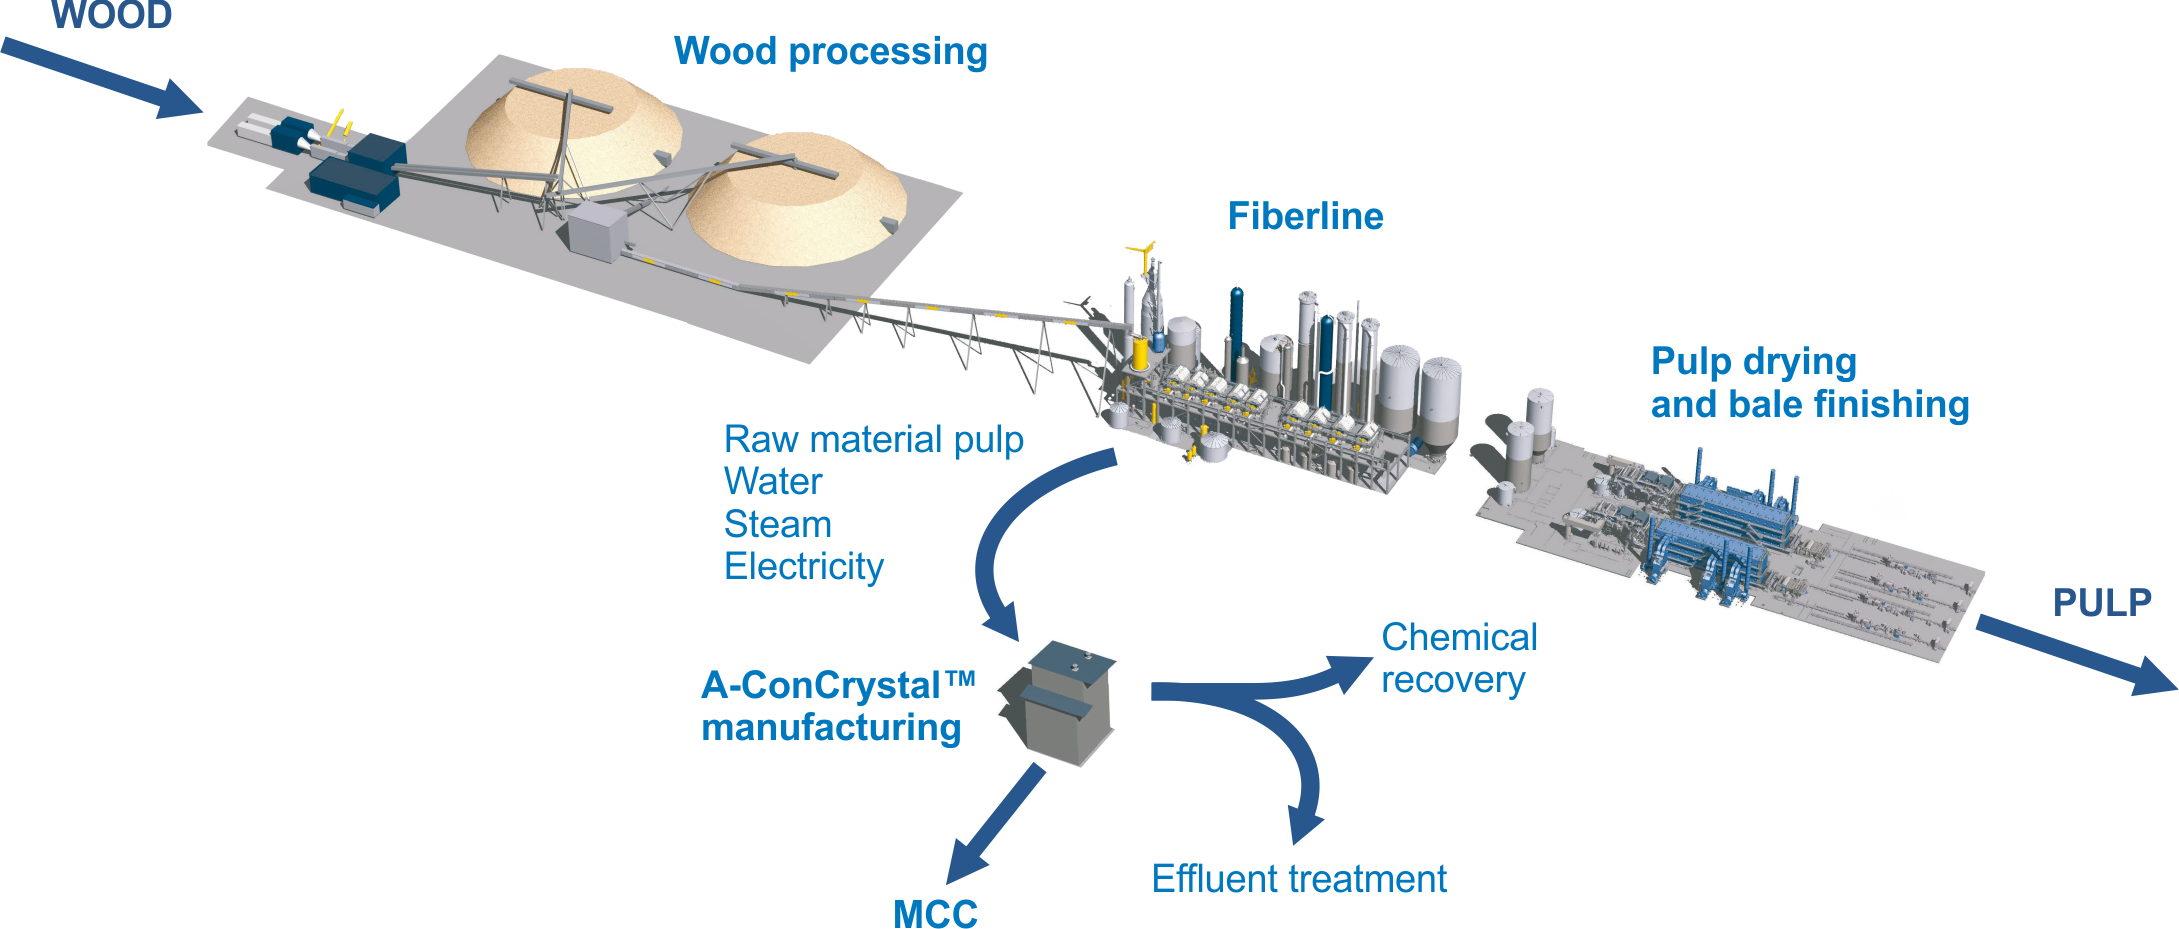 Process flow description of A-ConCrystal plant when integrated with a pulp mill